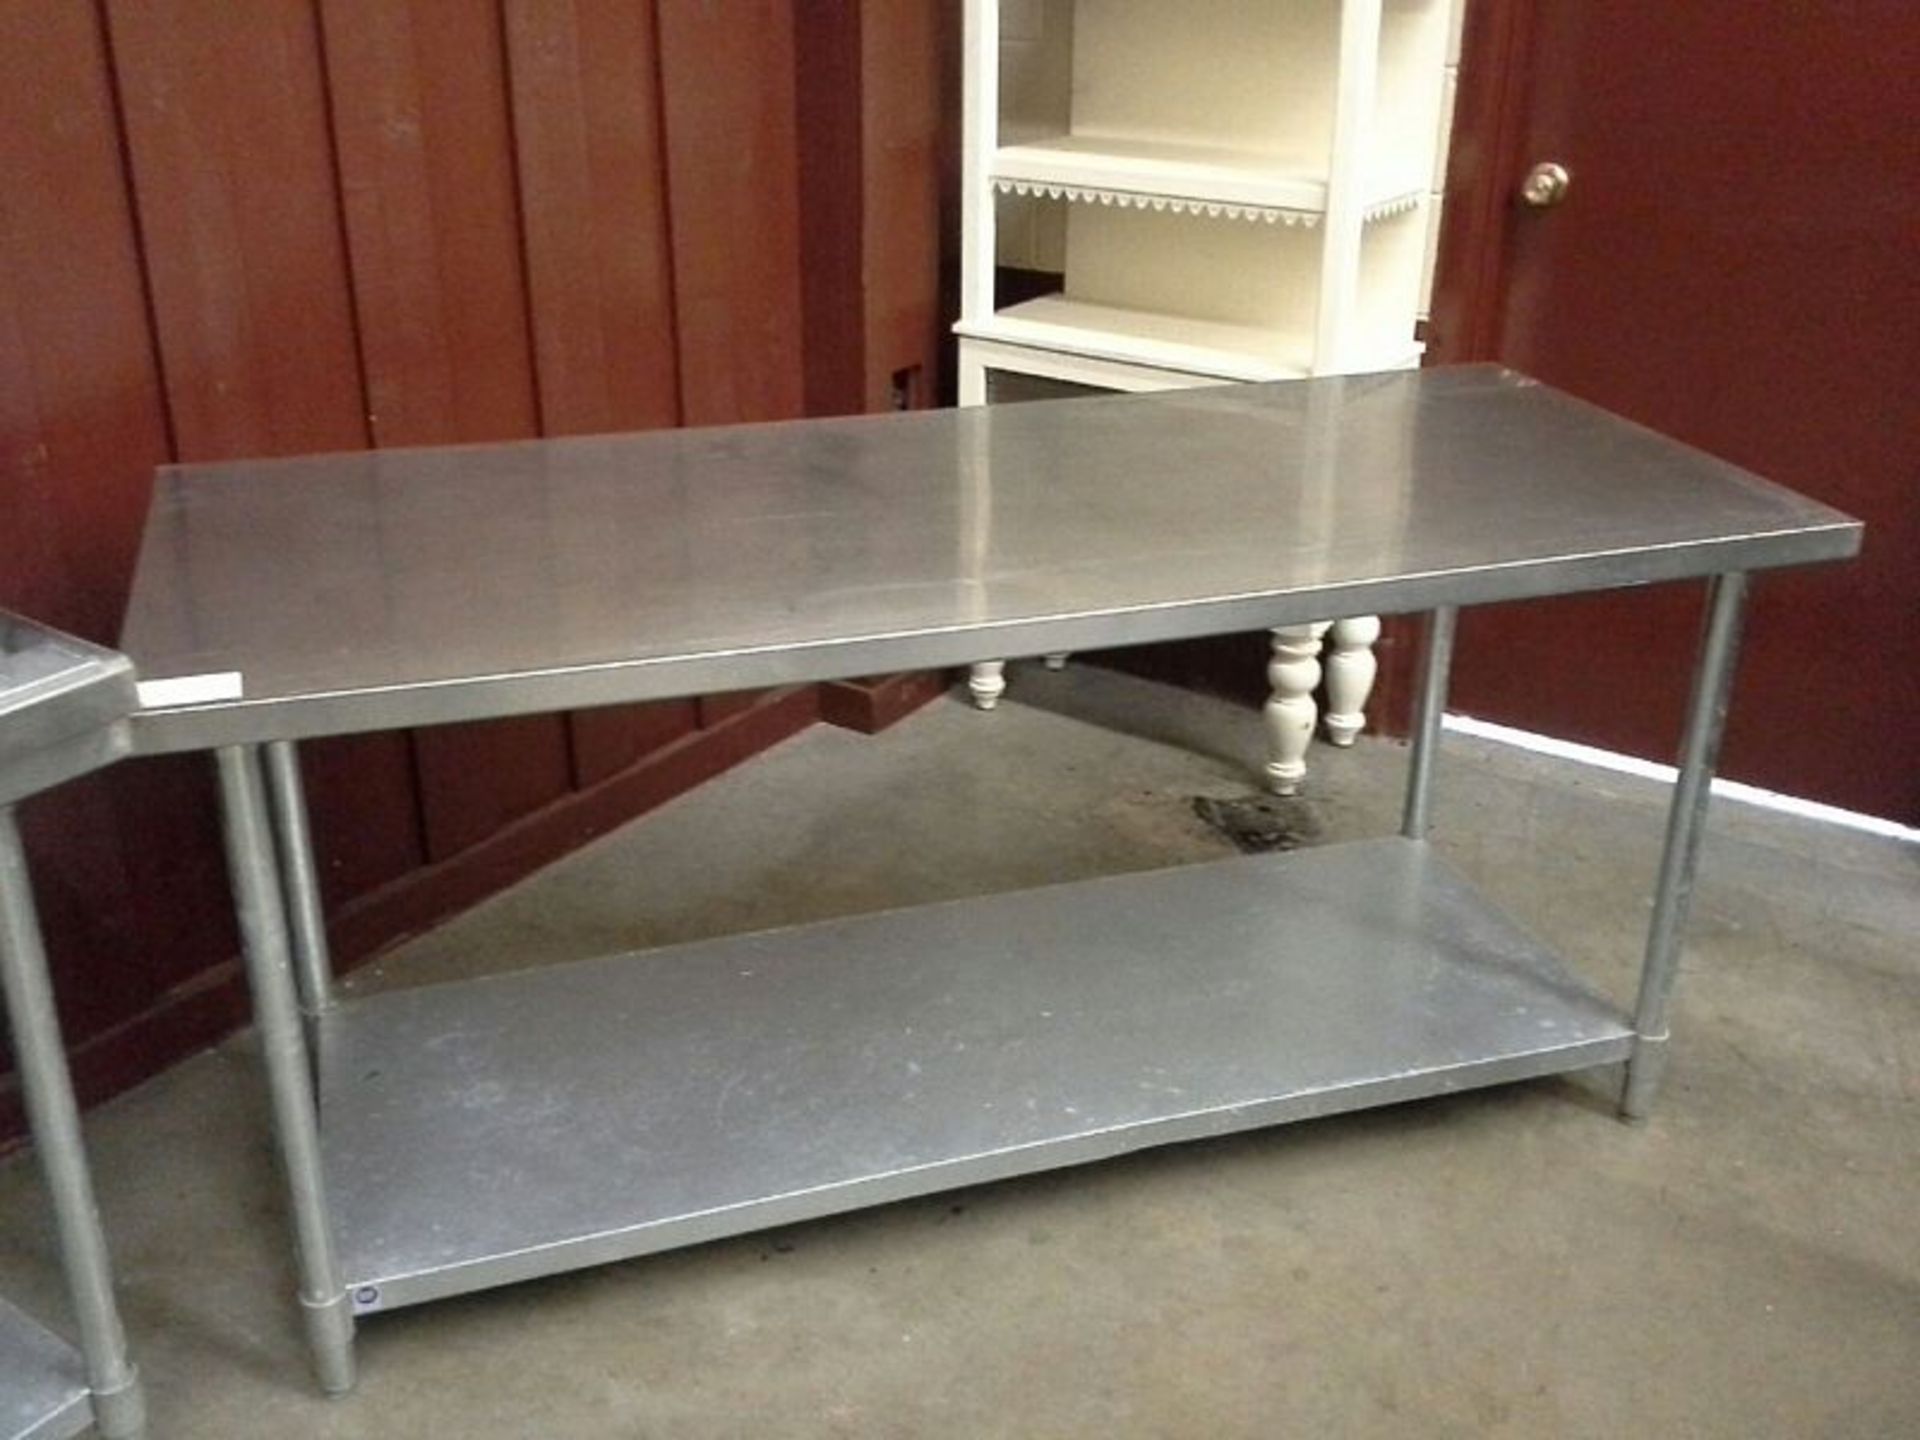 2 Tier 30 x 72" Stainless Steel Table